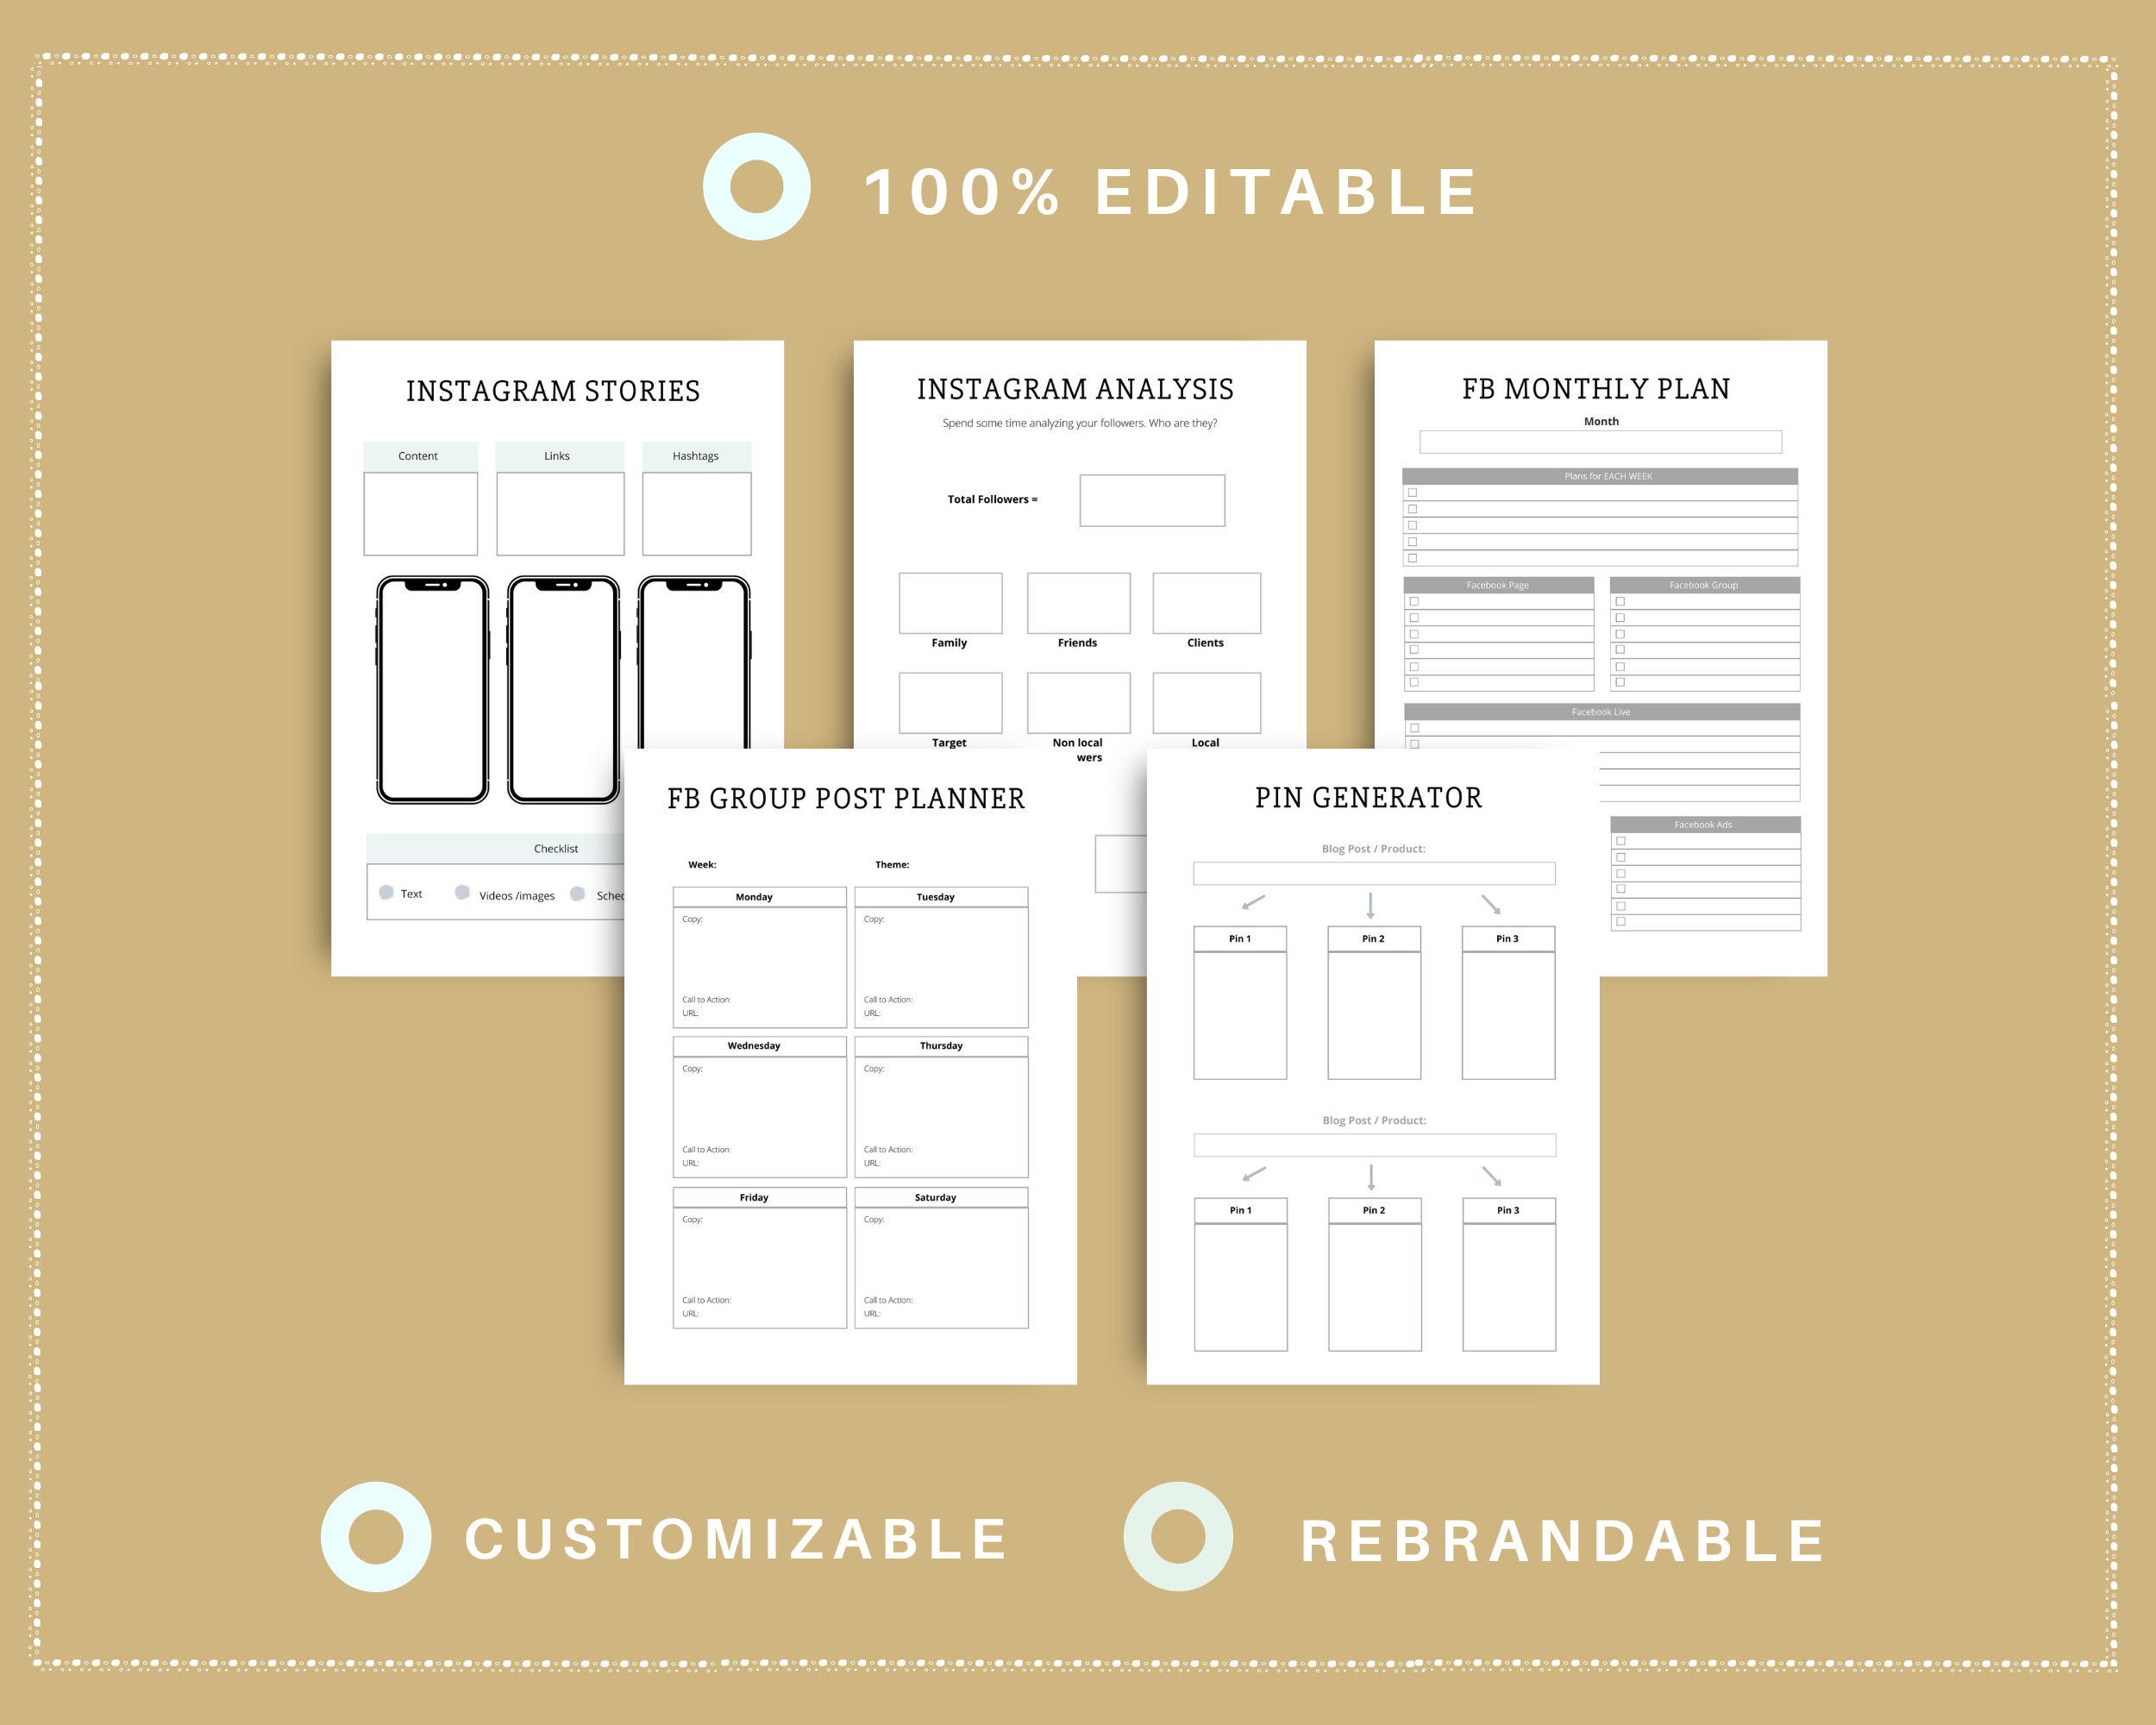 Editable Social Media Planner Templates in Canva | Commercial Use